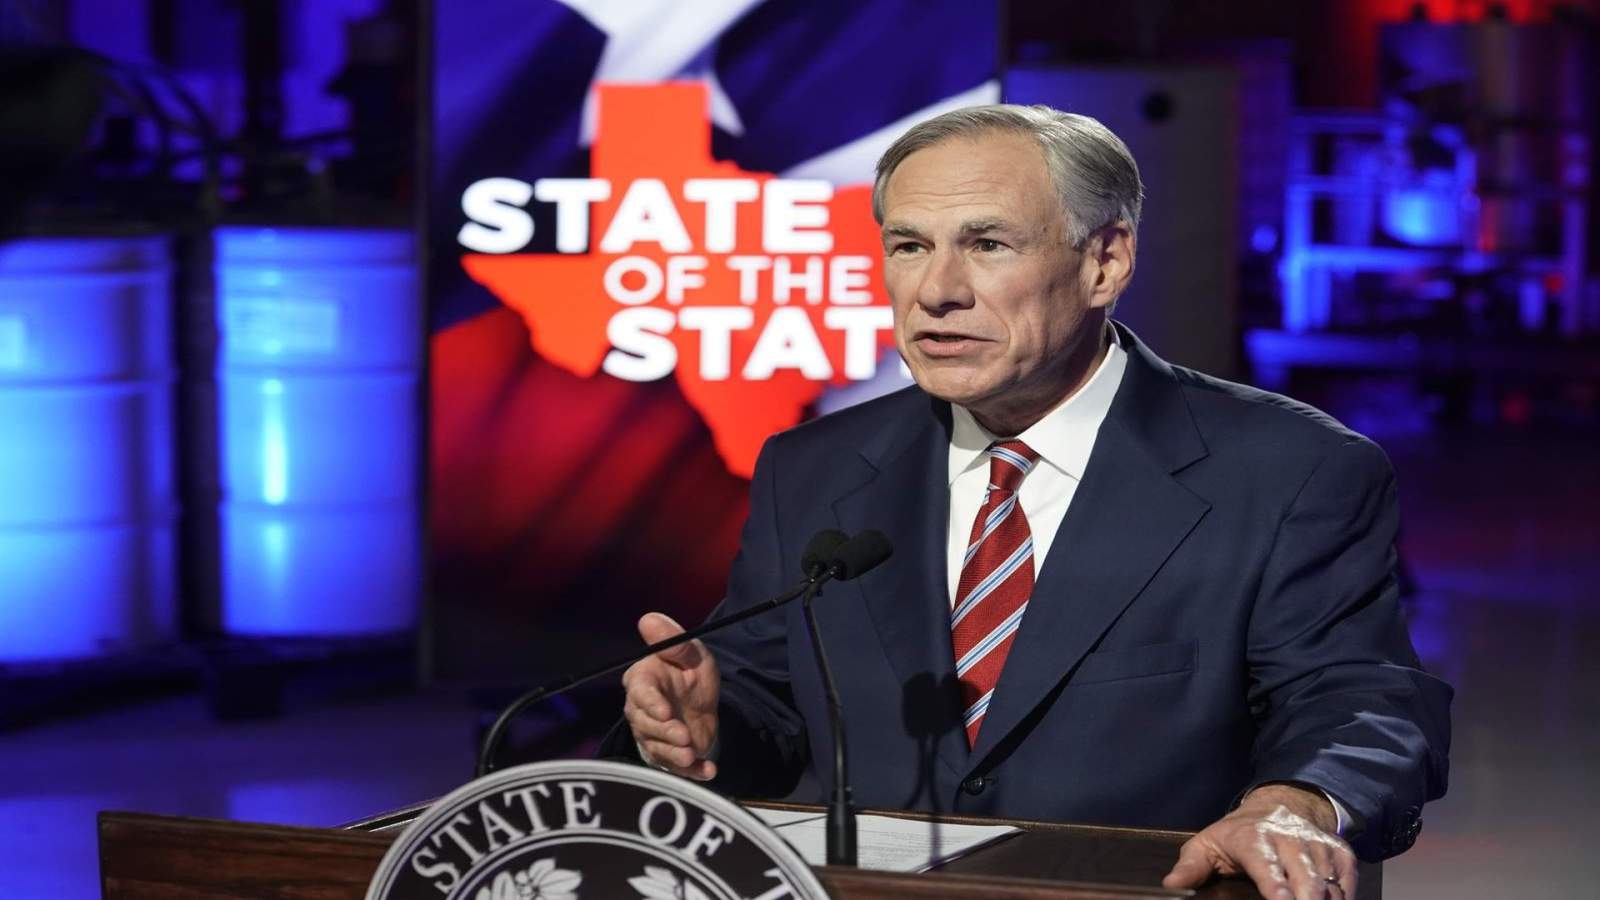 Abbott in State of the State address: Texas on ‘comeback’ from pandemic